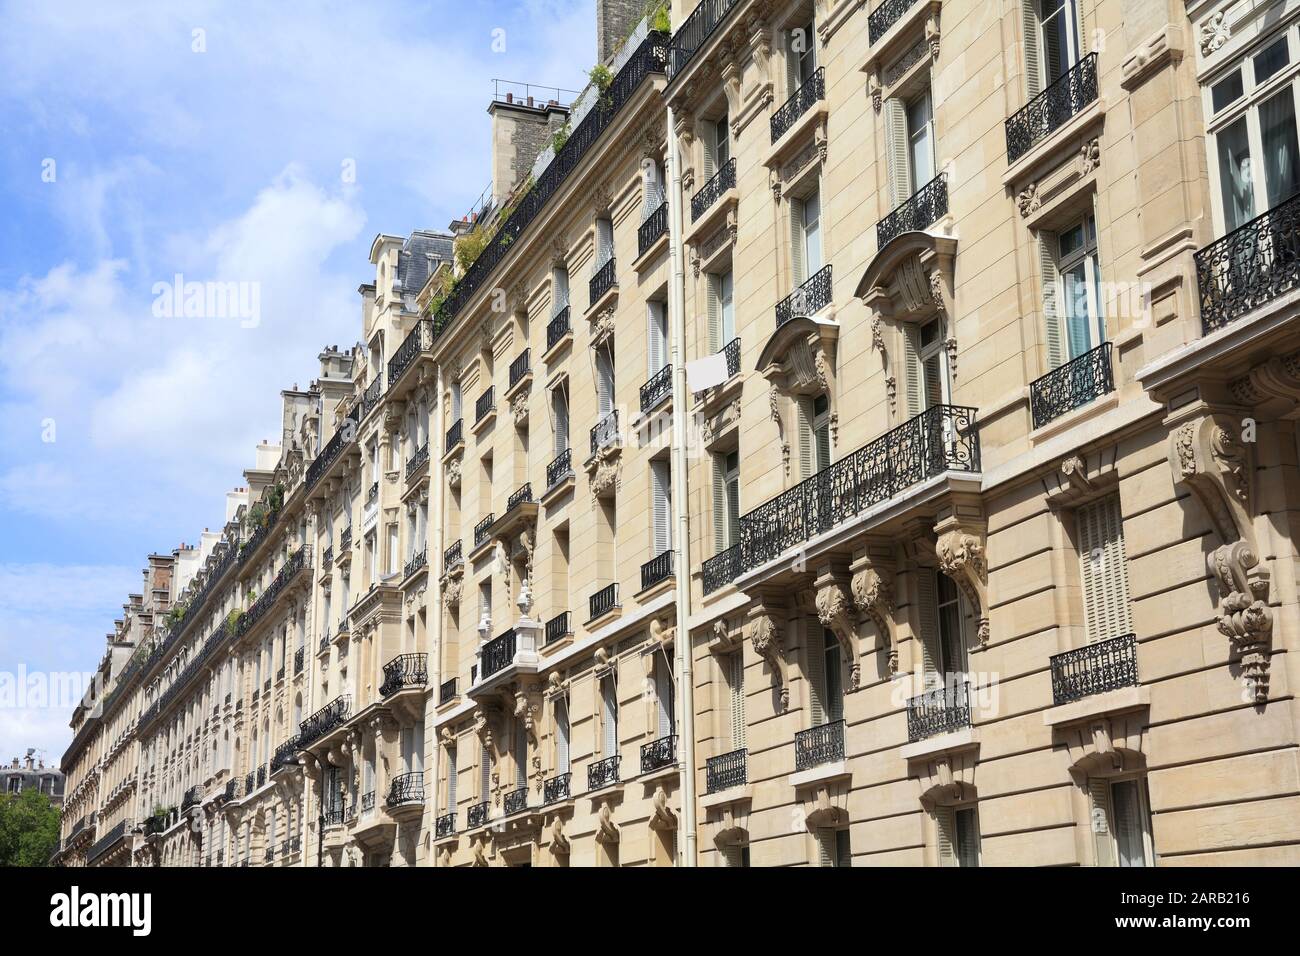 Paris, France - typical old apartment buildings. Windows and balconies. Stock Photo